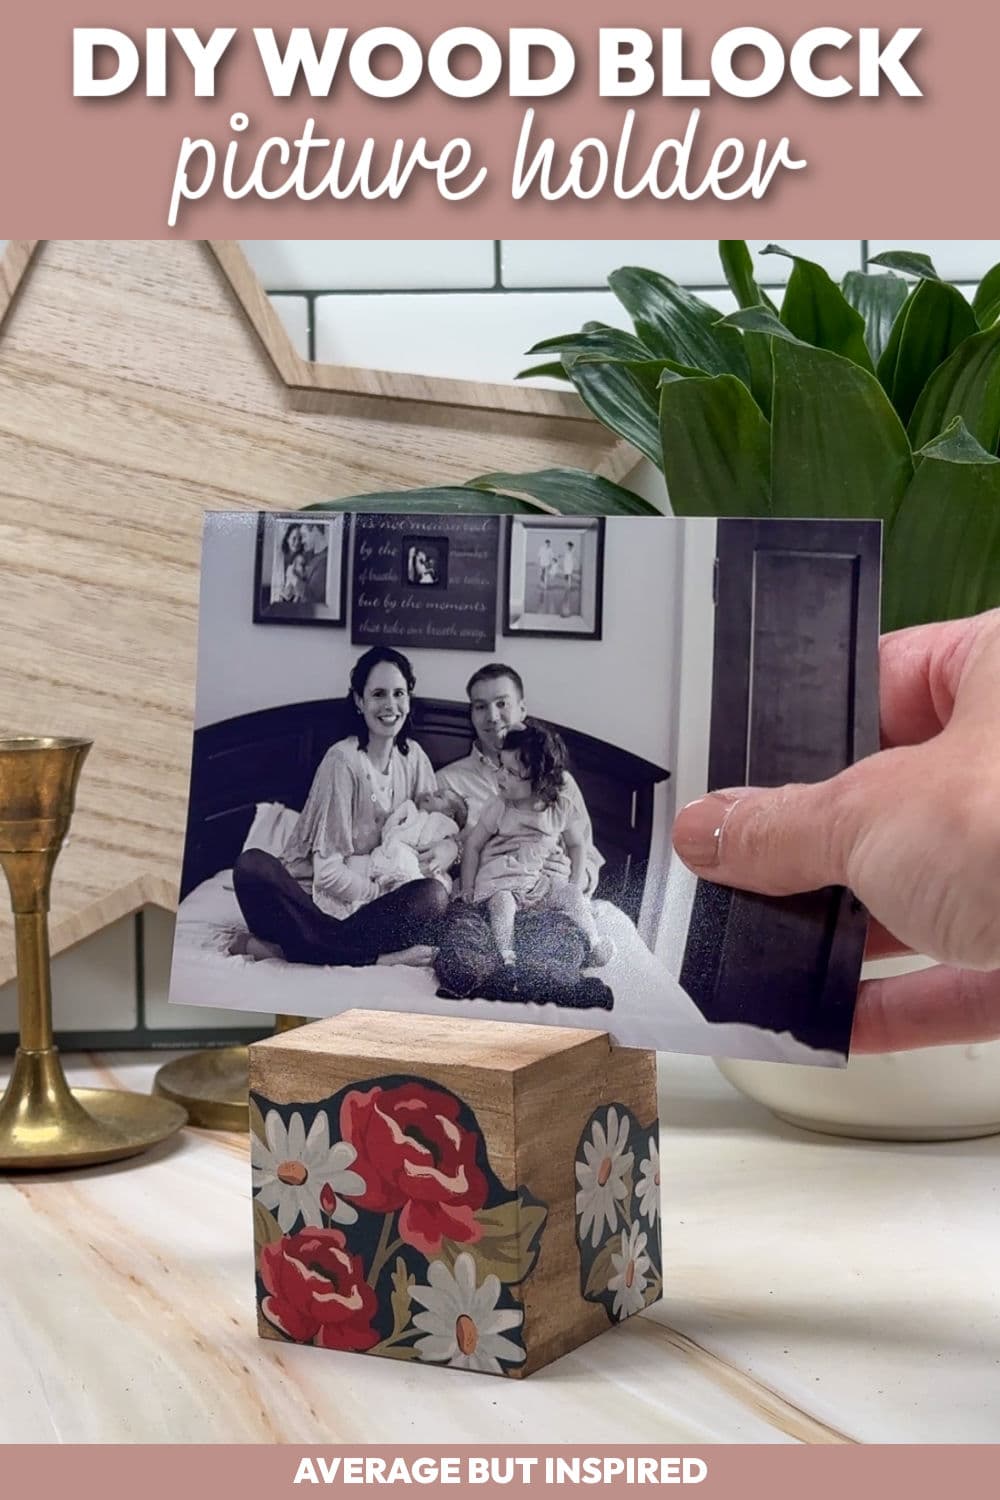 Grab a craft wood cube or unfinished wood block at Dollar Tree (or make your own!), and create a custom wood block photo holder! This is an easy wood block craft idea that can be customized any way you like!